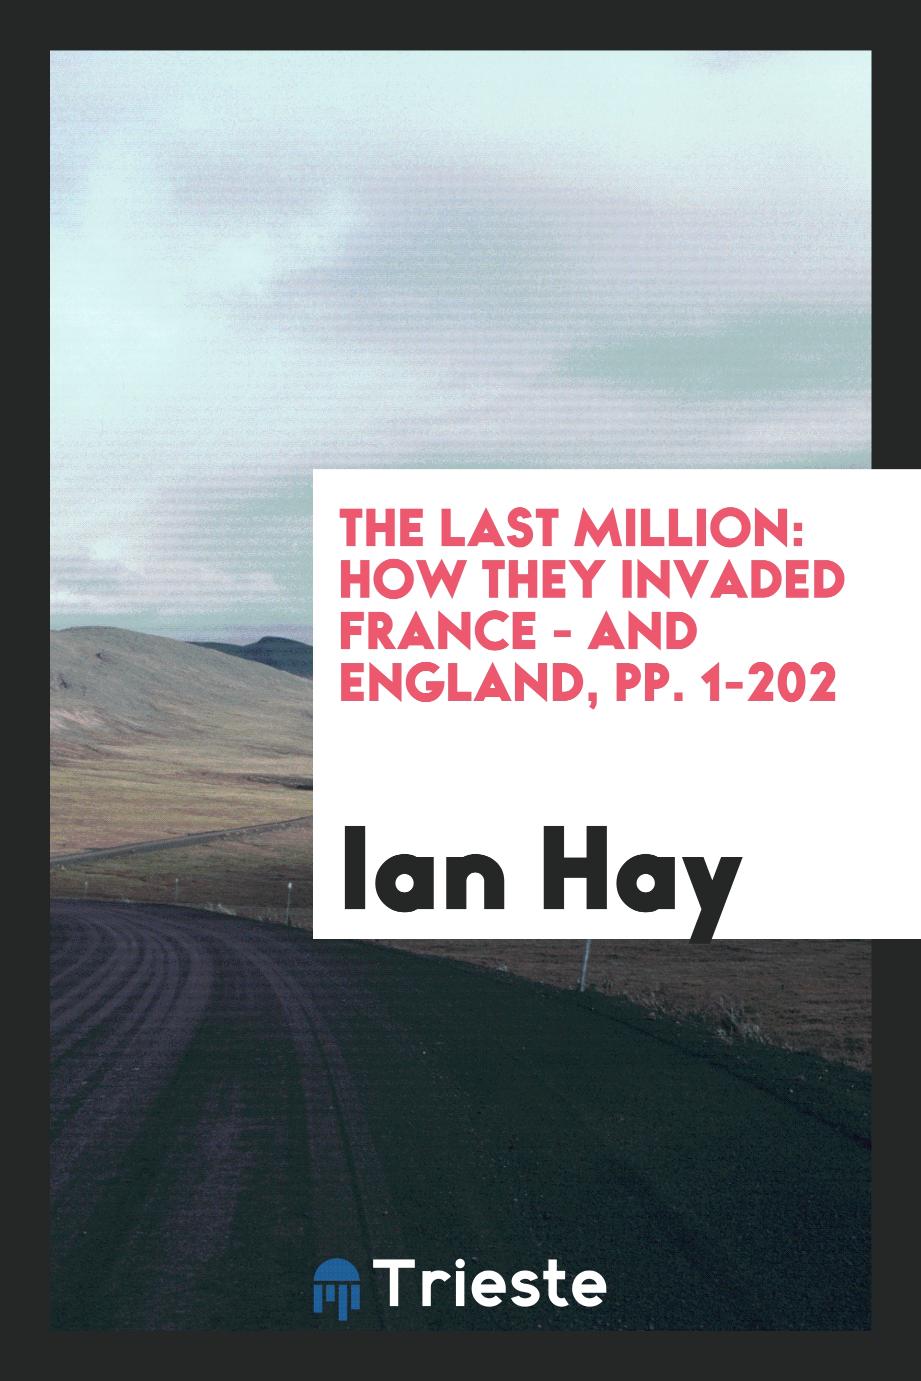 The Last Million: How They Invaded France - and England, pp. 1-202